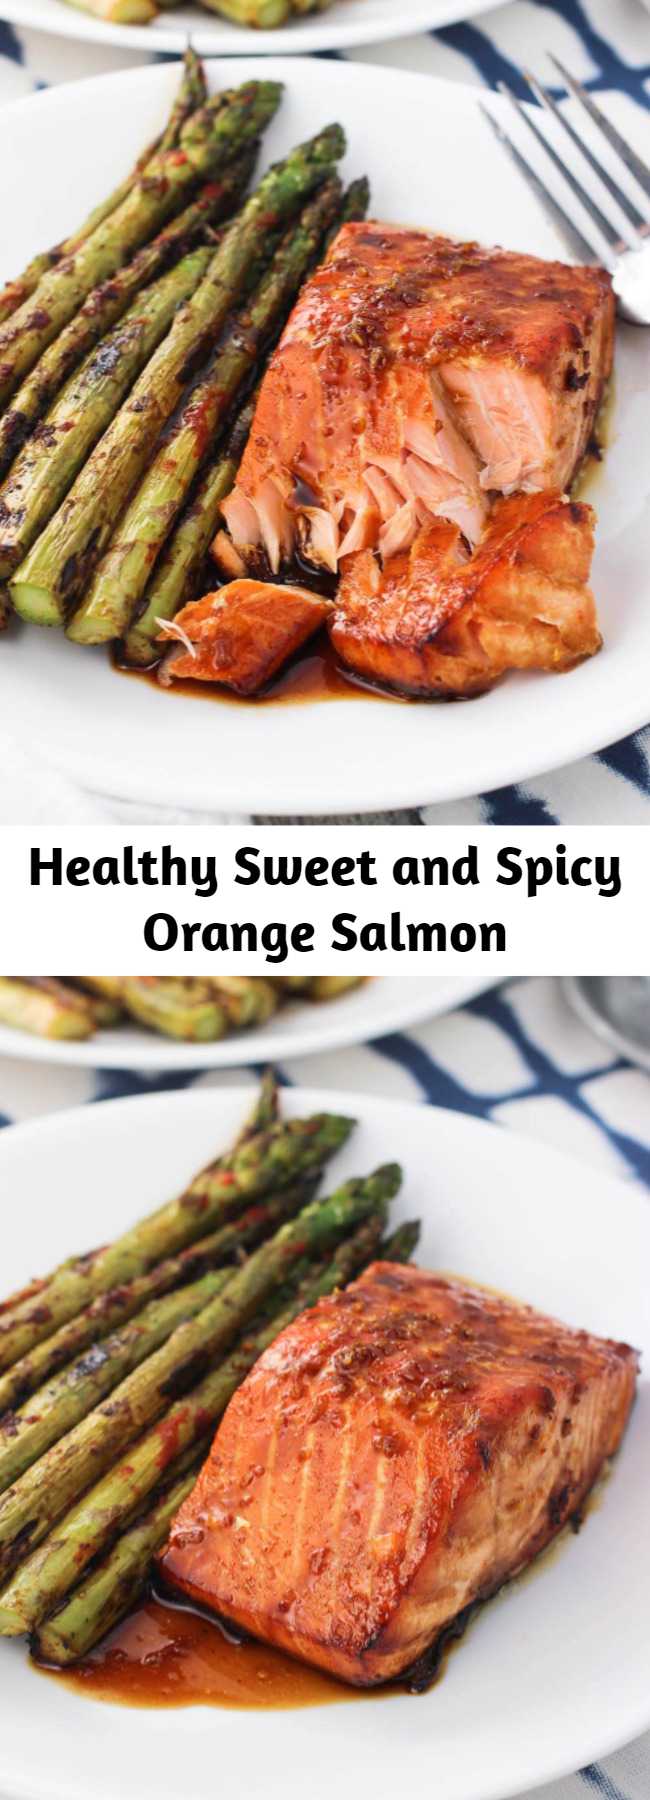 Healthy Sweet and Spicy Orange Salmon - Today I’m excited to share one of my recent favorite dinners - sweet and spicy orange salmon. It's a healthy dinner idea that is quick and easy.